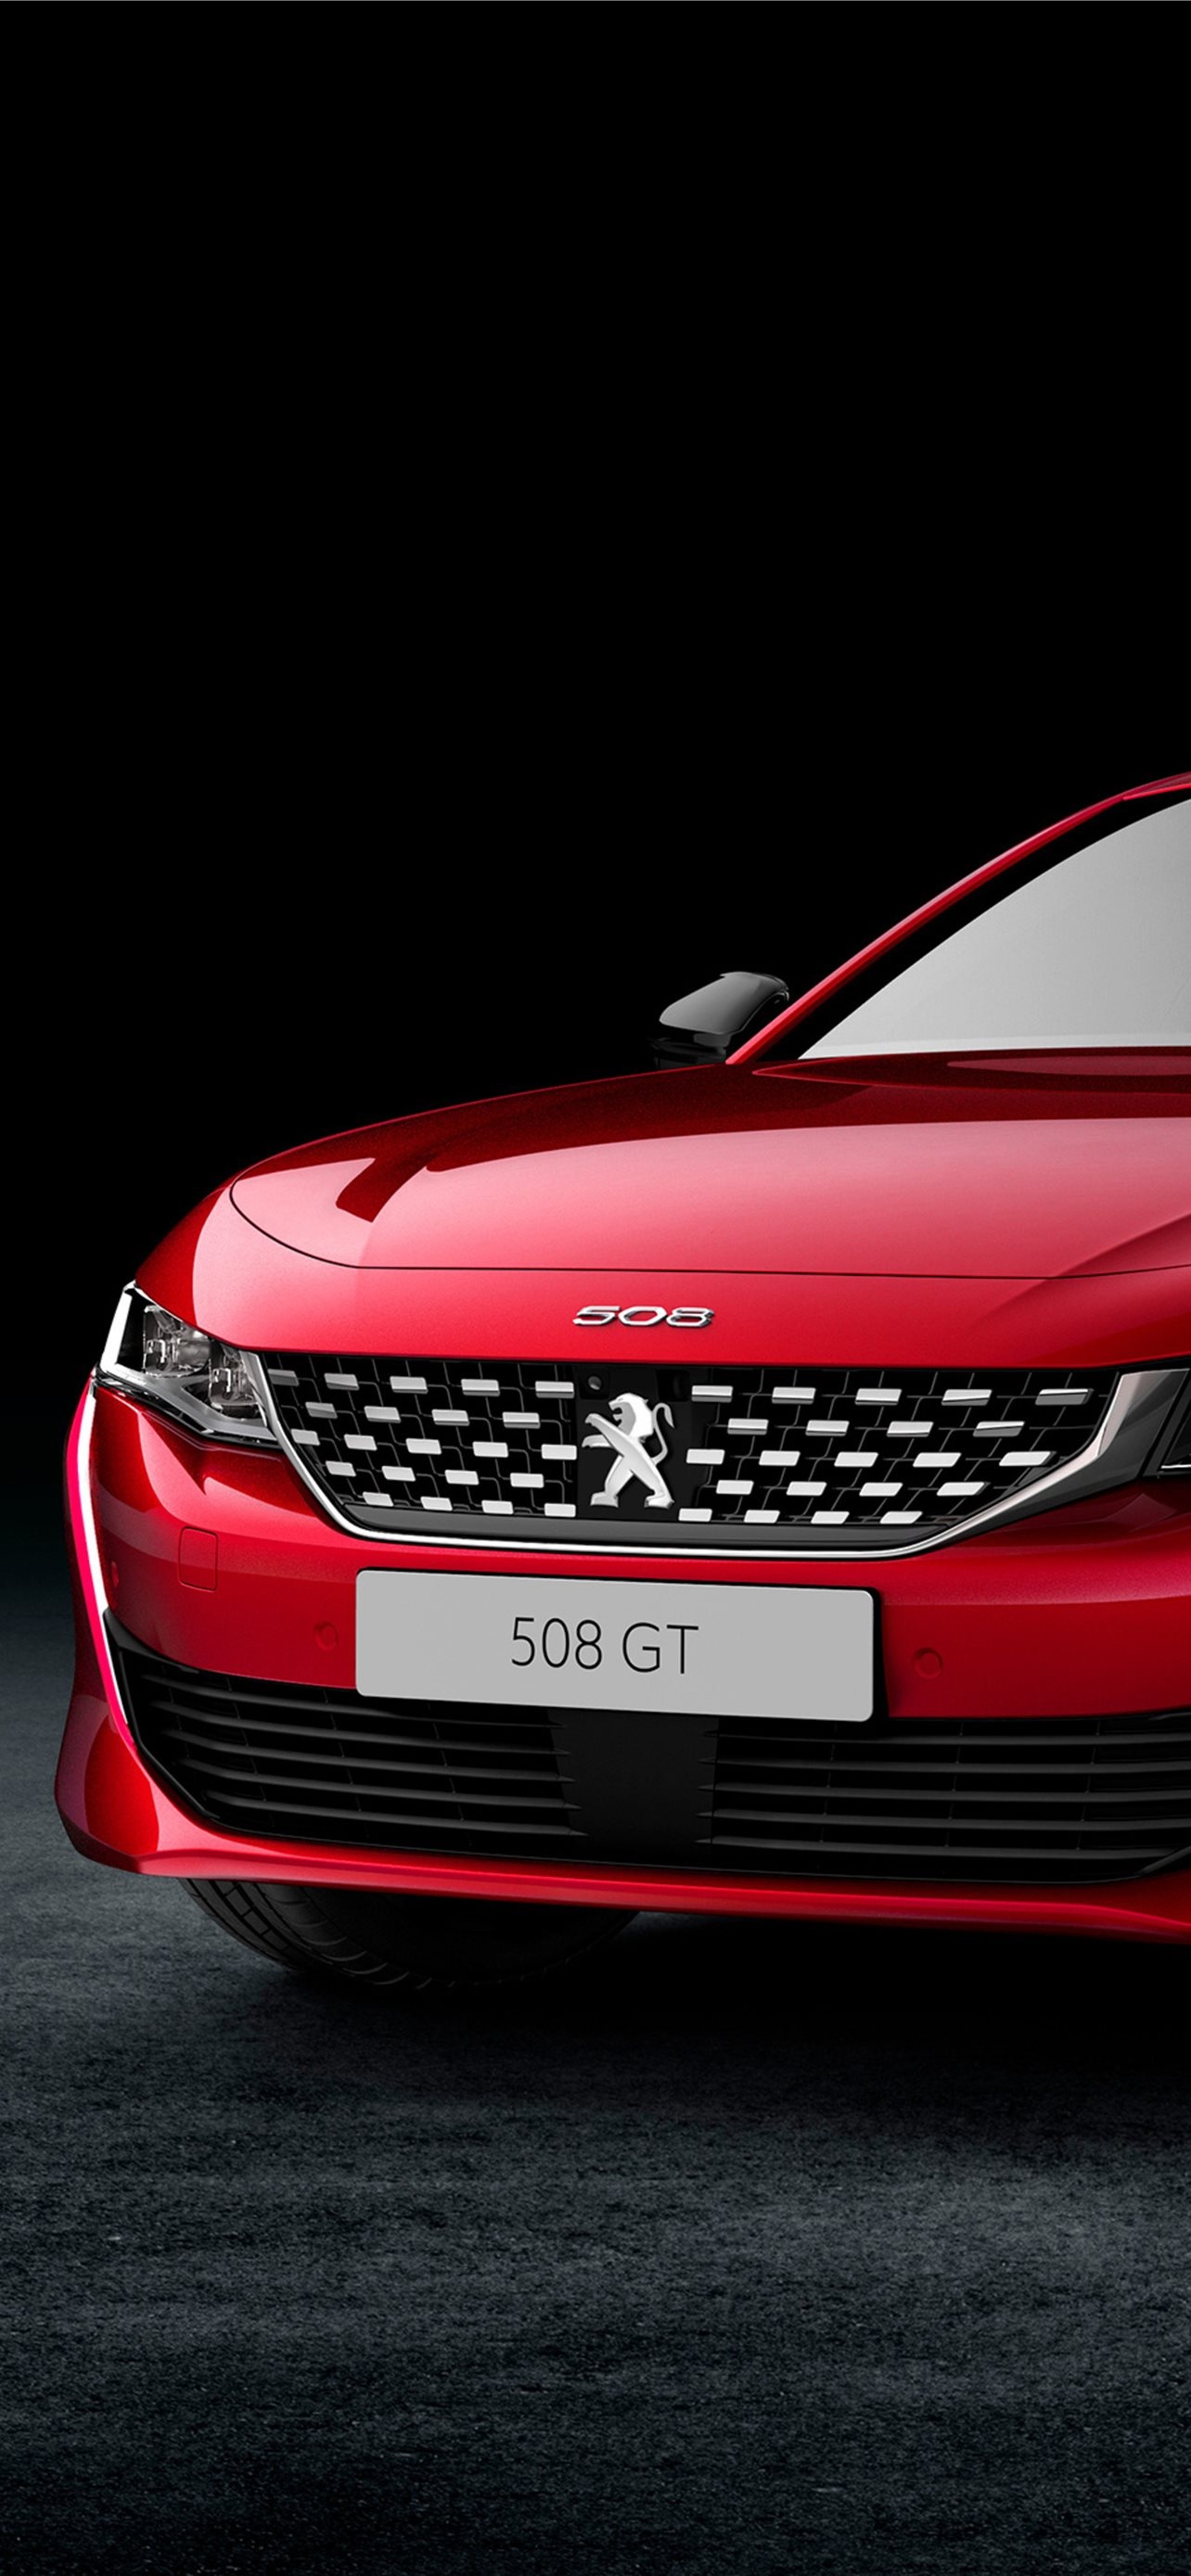 Peugeot 508, iPhone wallpapers, Free download, 1290x2780 HD Handy